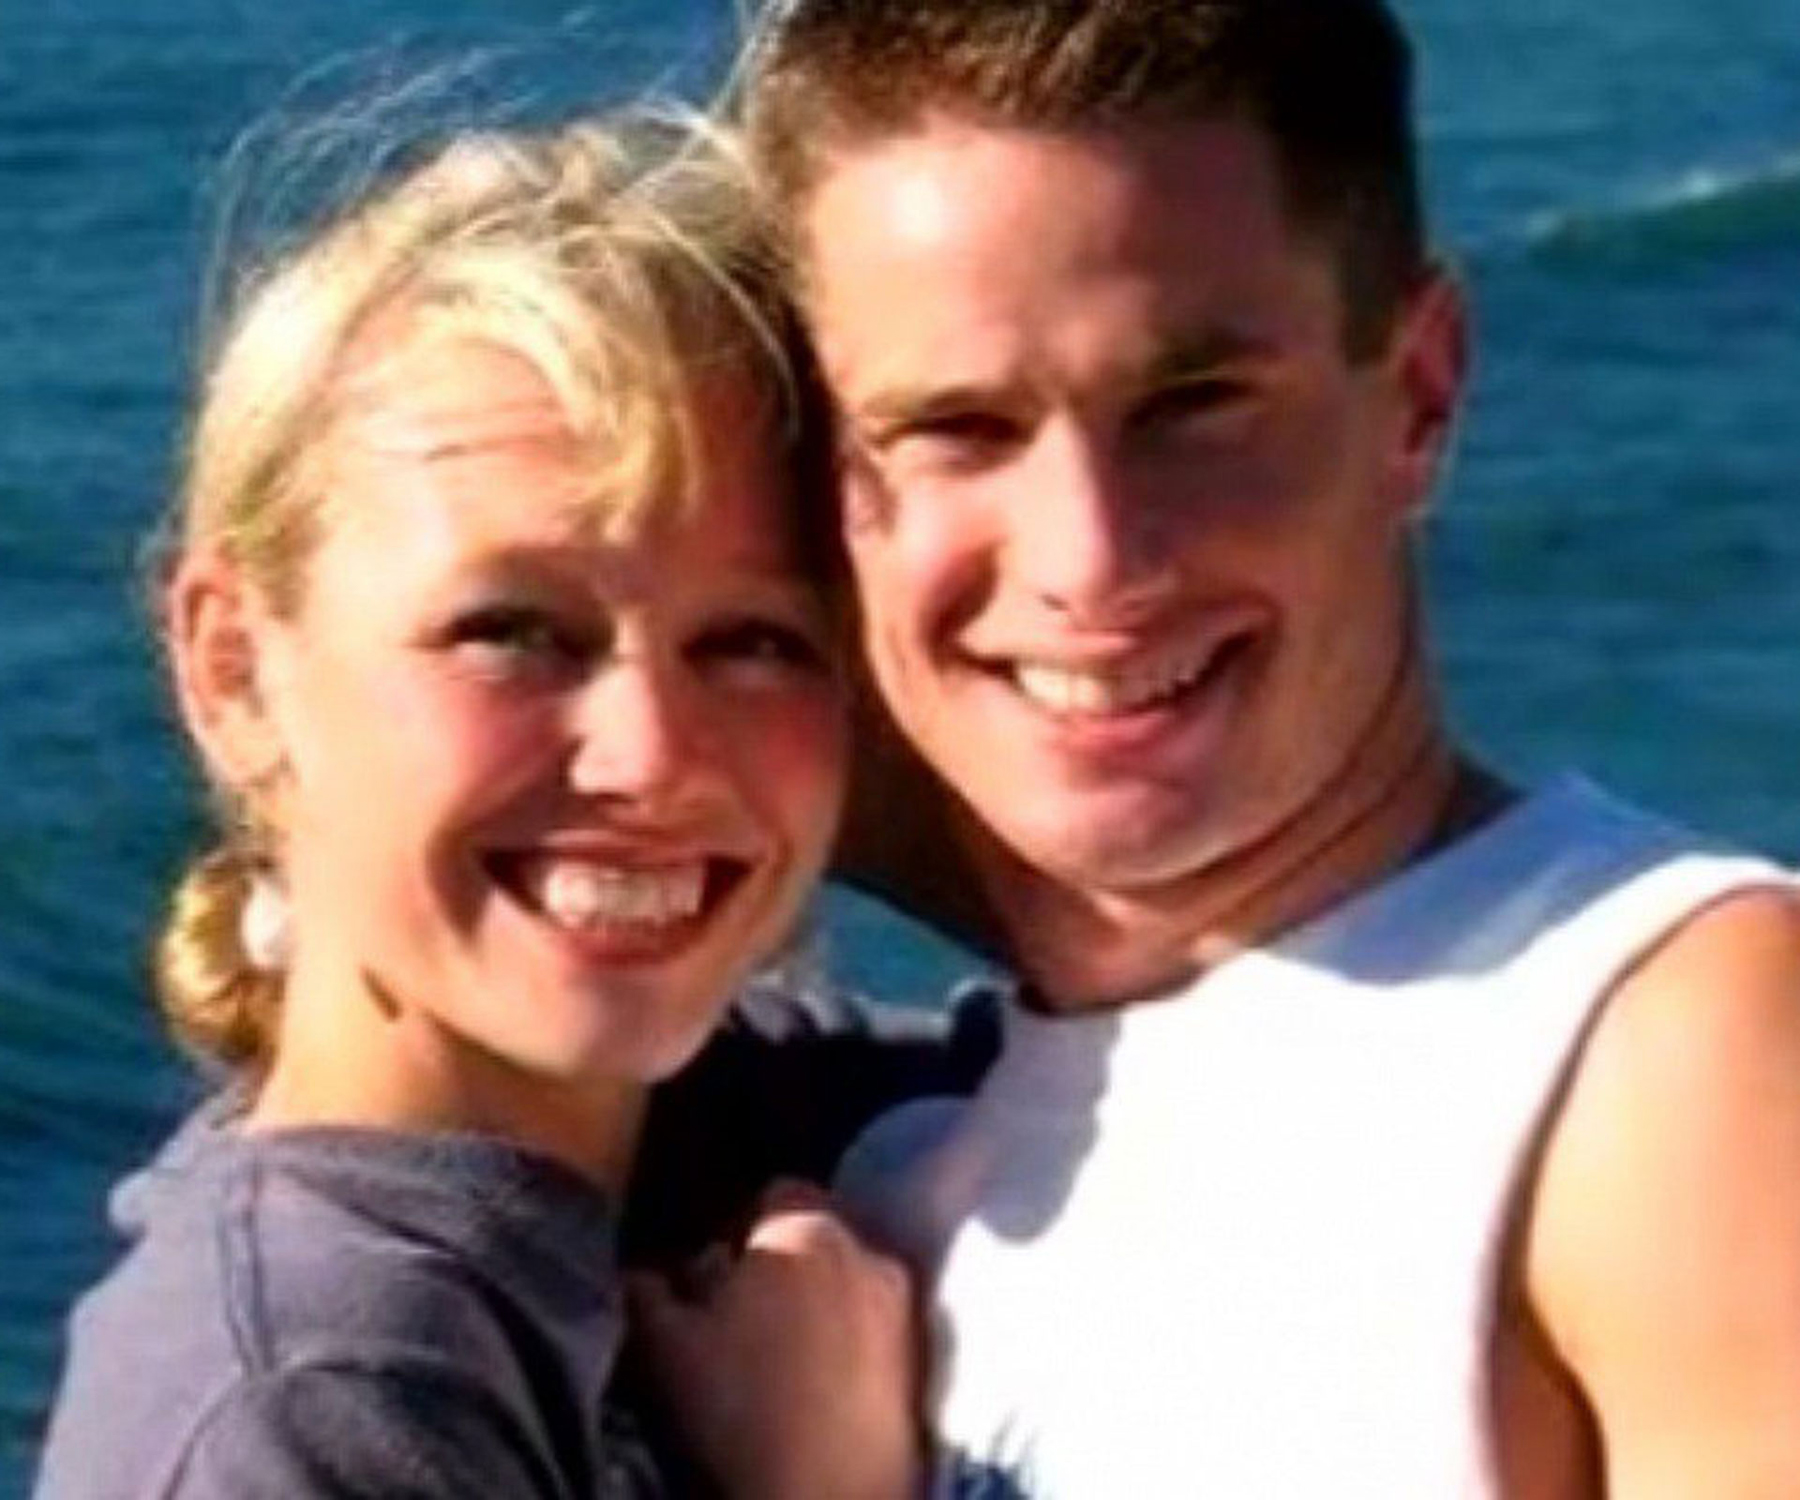 A ‘message’ burned into her skin: Sheri Papini’s abductor’s cruellest act